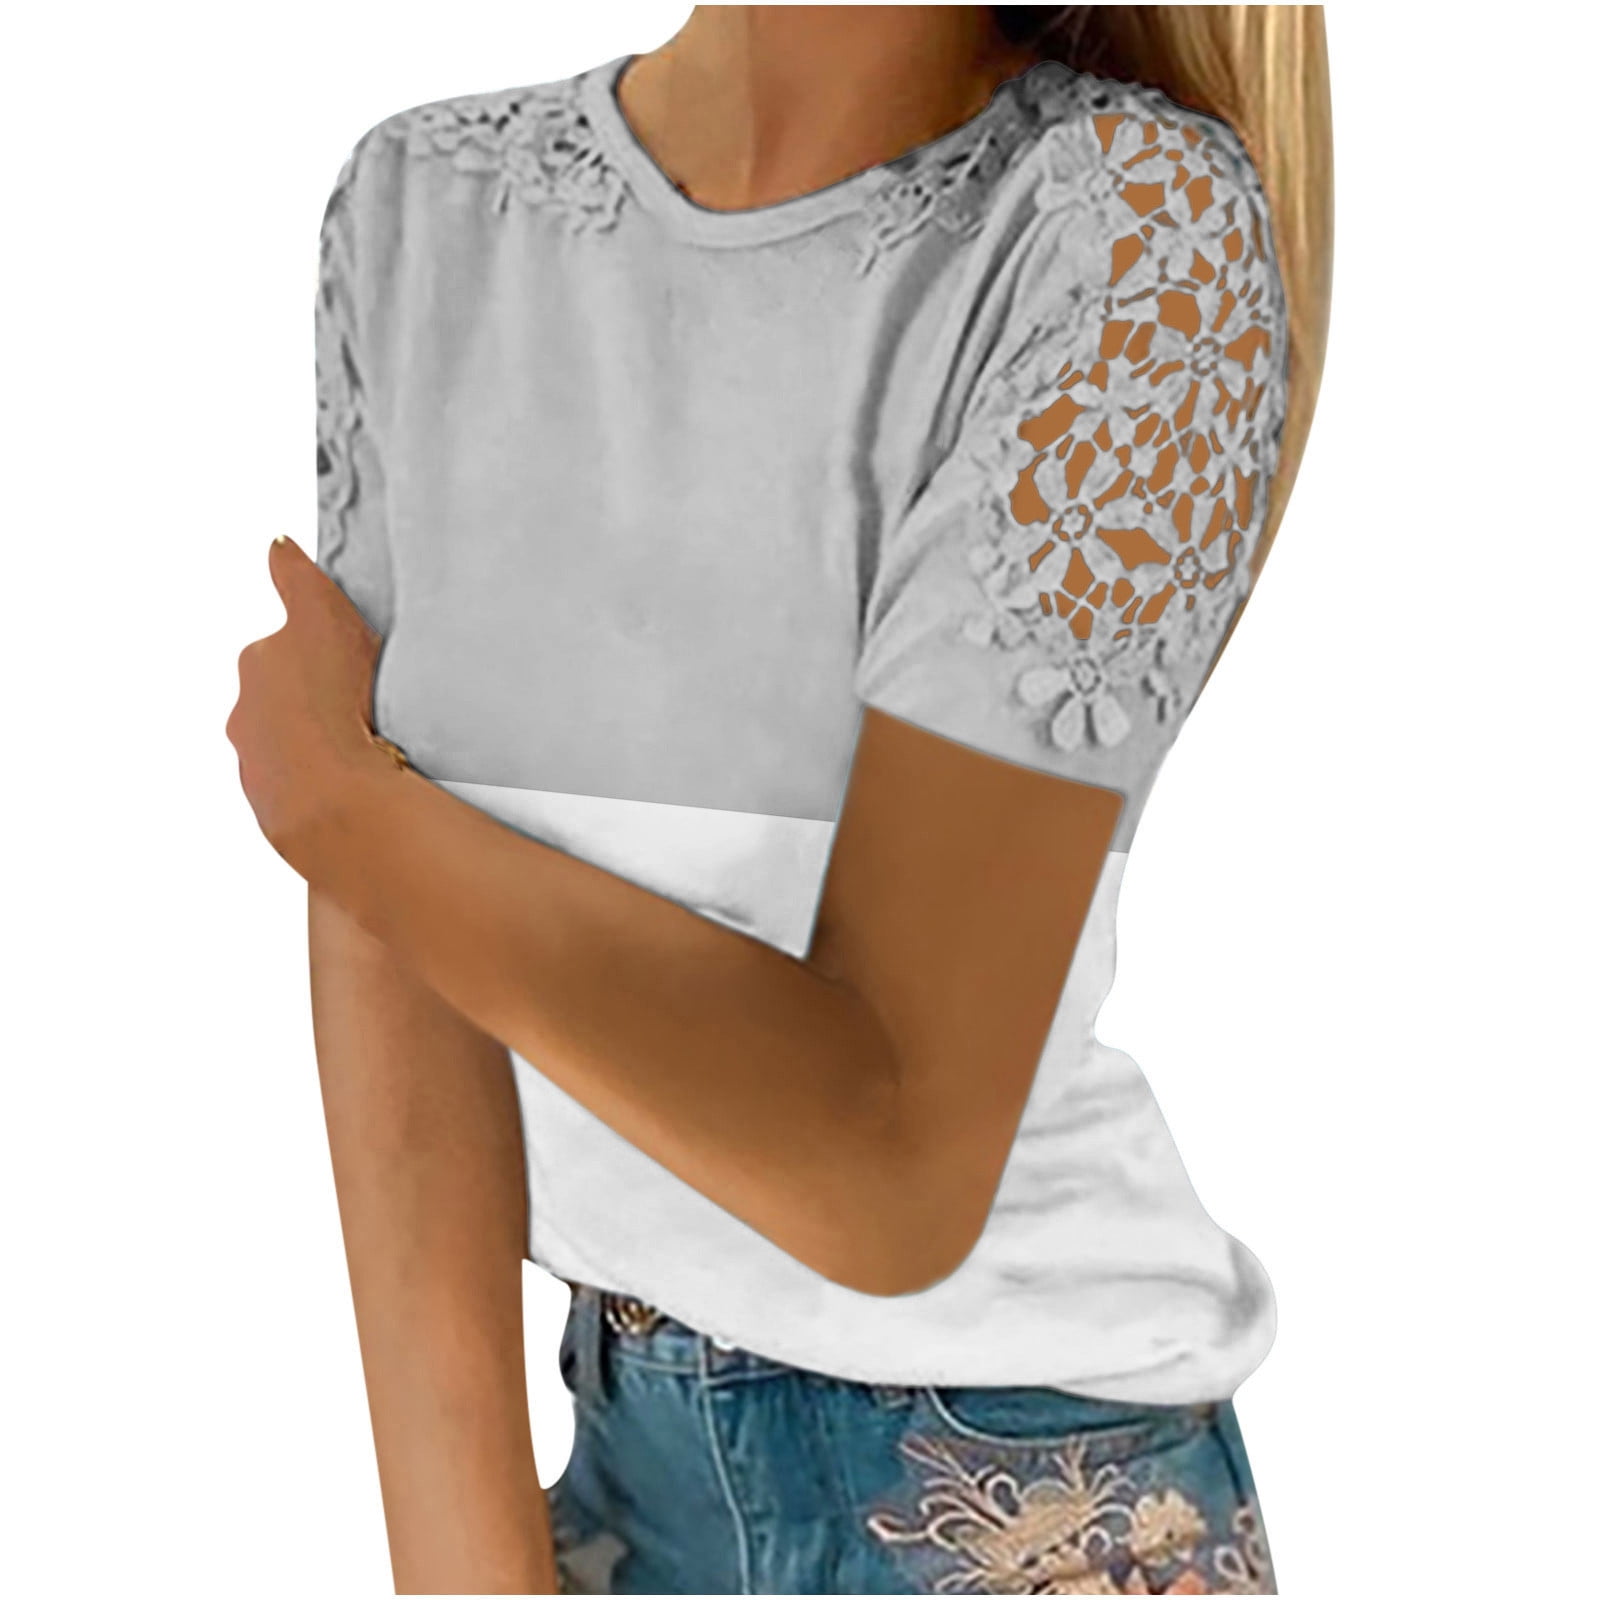 Airpow Women's Hollowed Out Printed Short Sleeves Women's Fashion ...